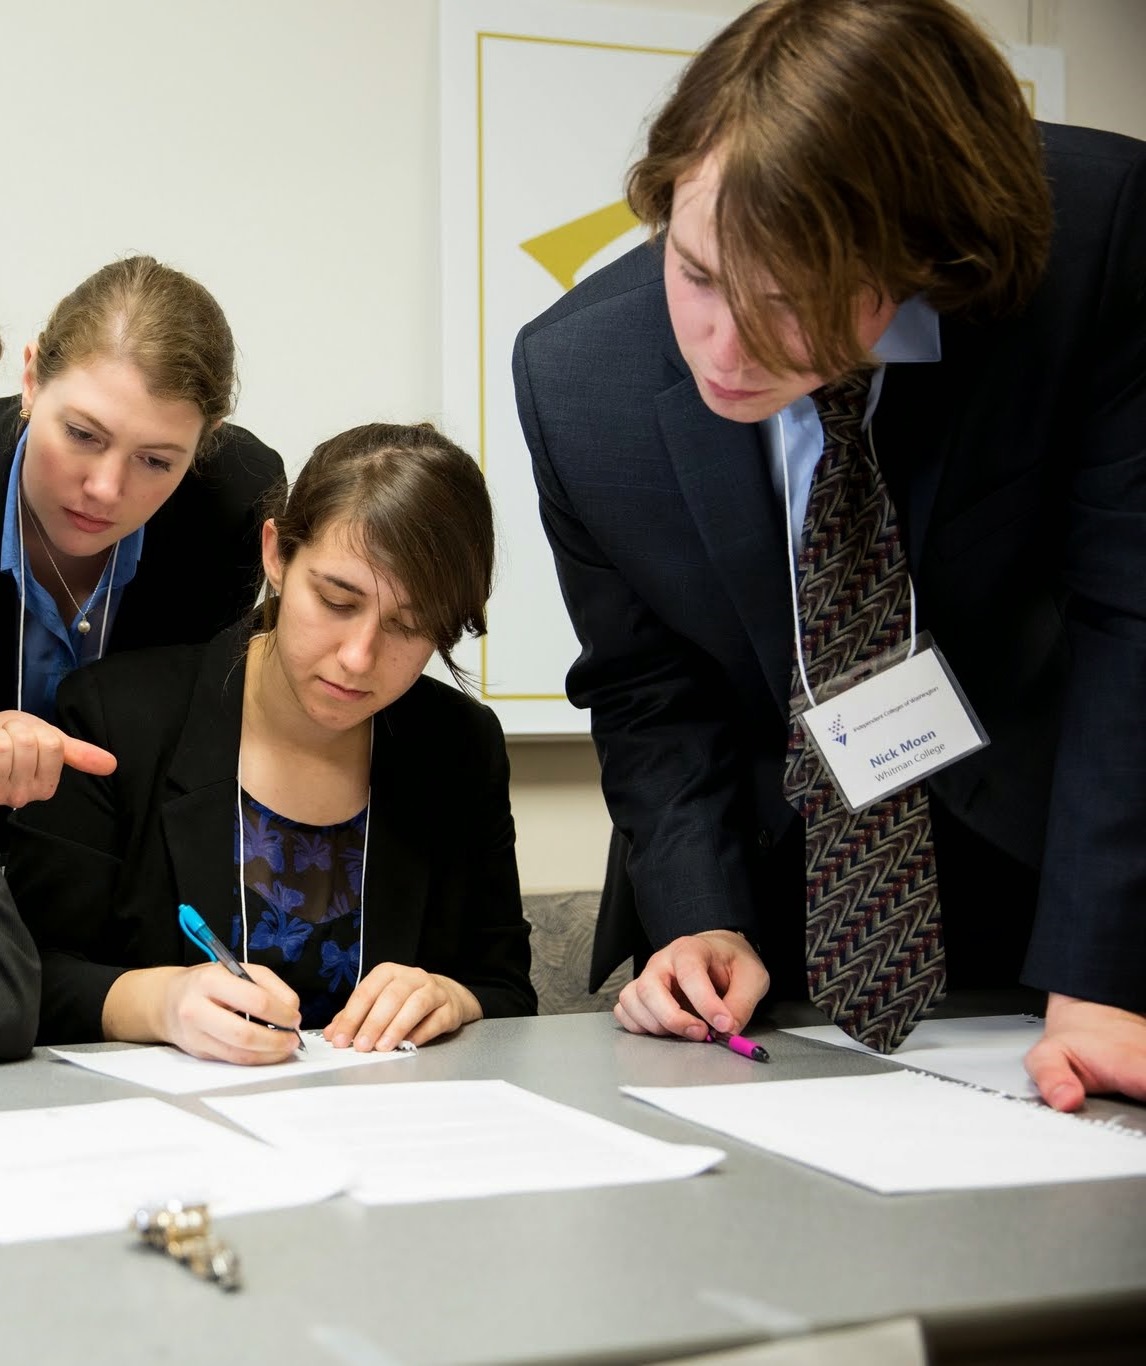 Whitman students compete in last year's Ethics Bowl